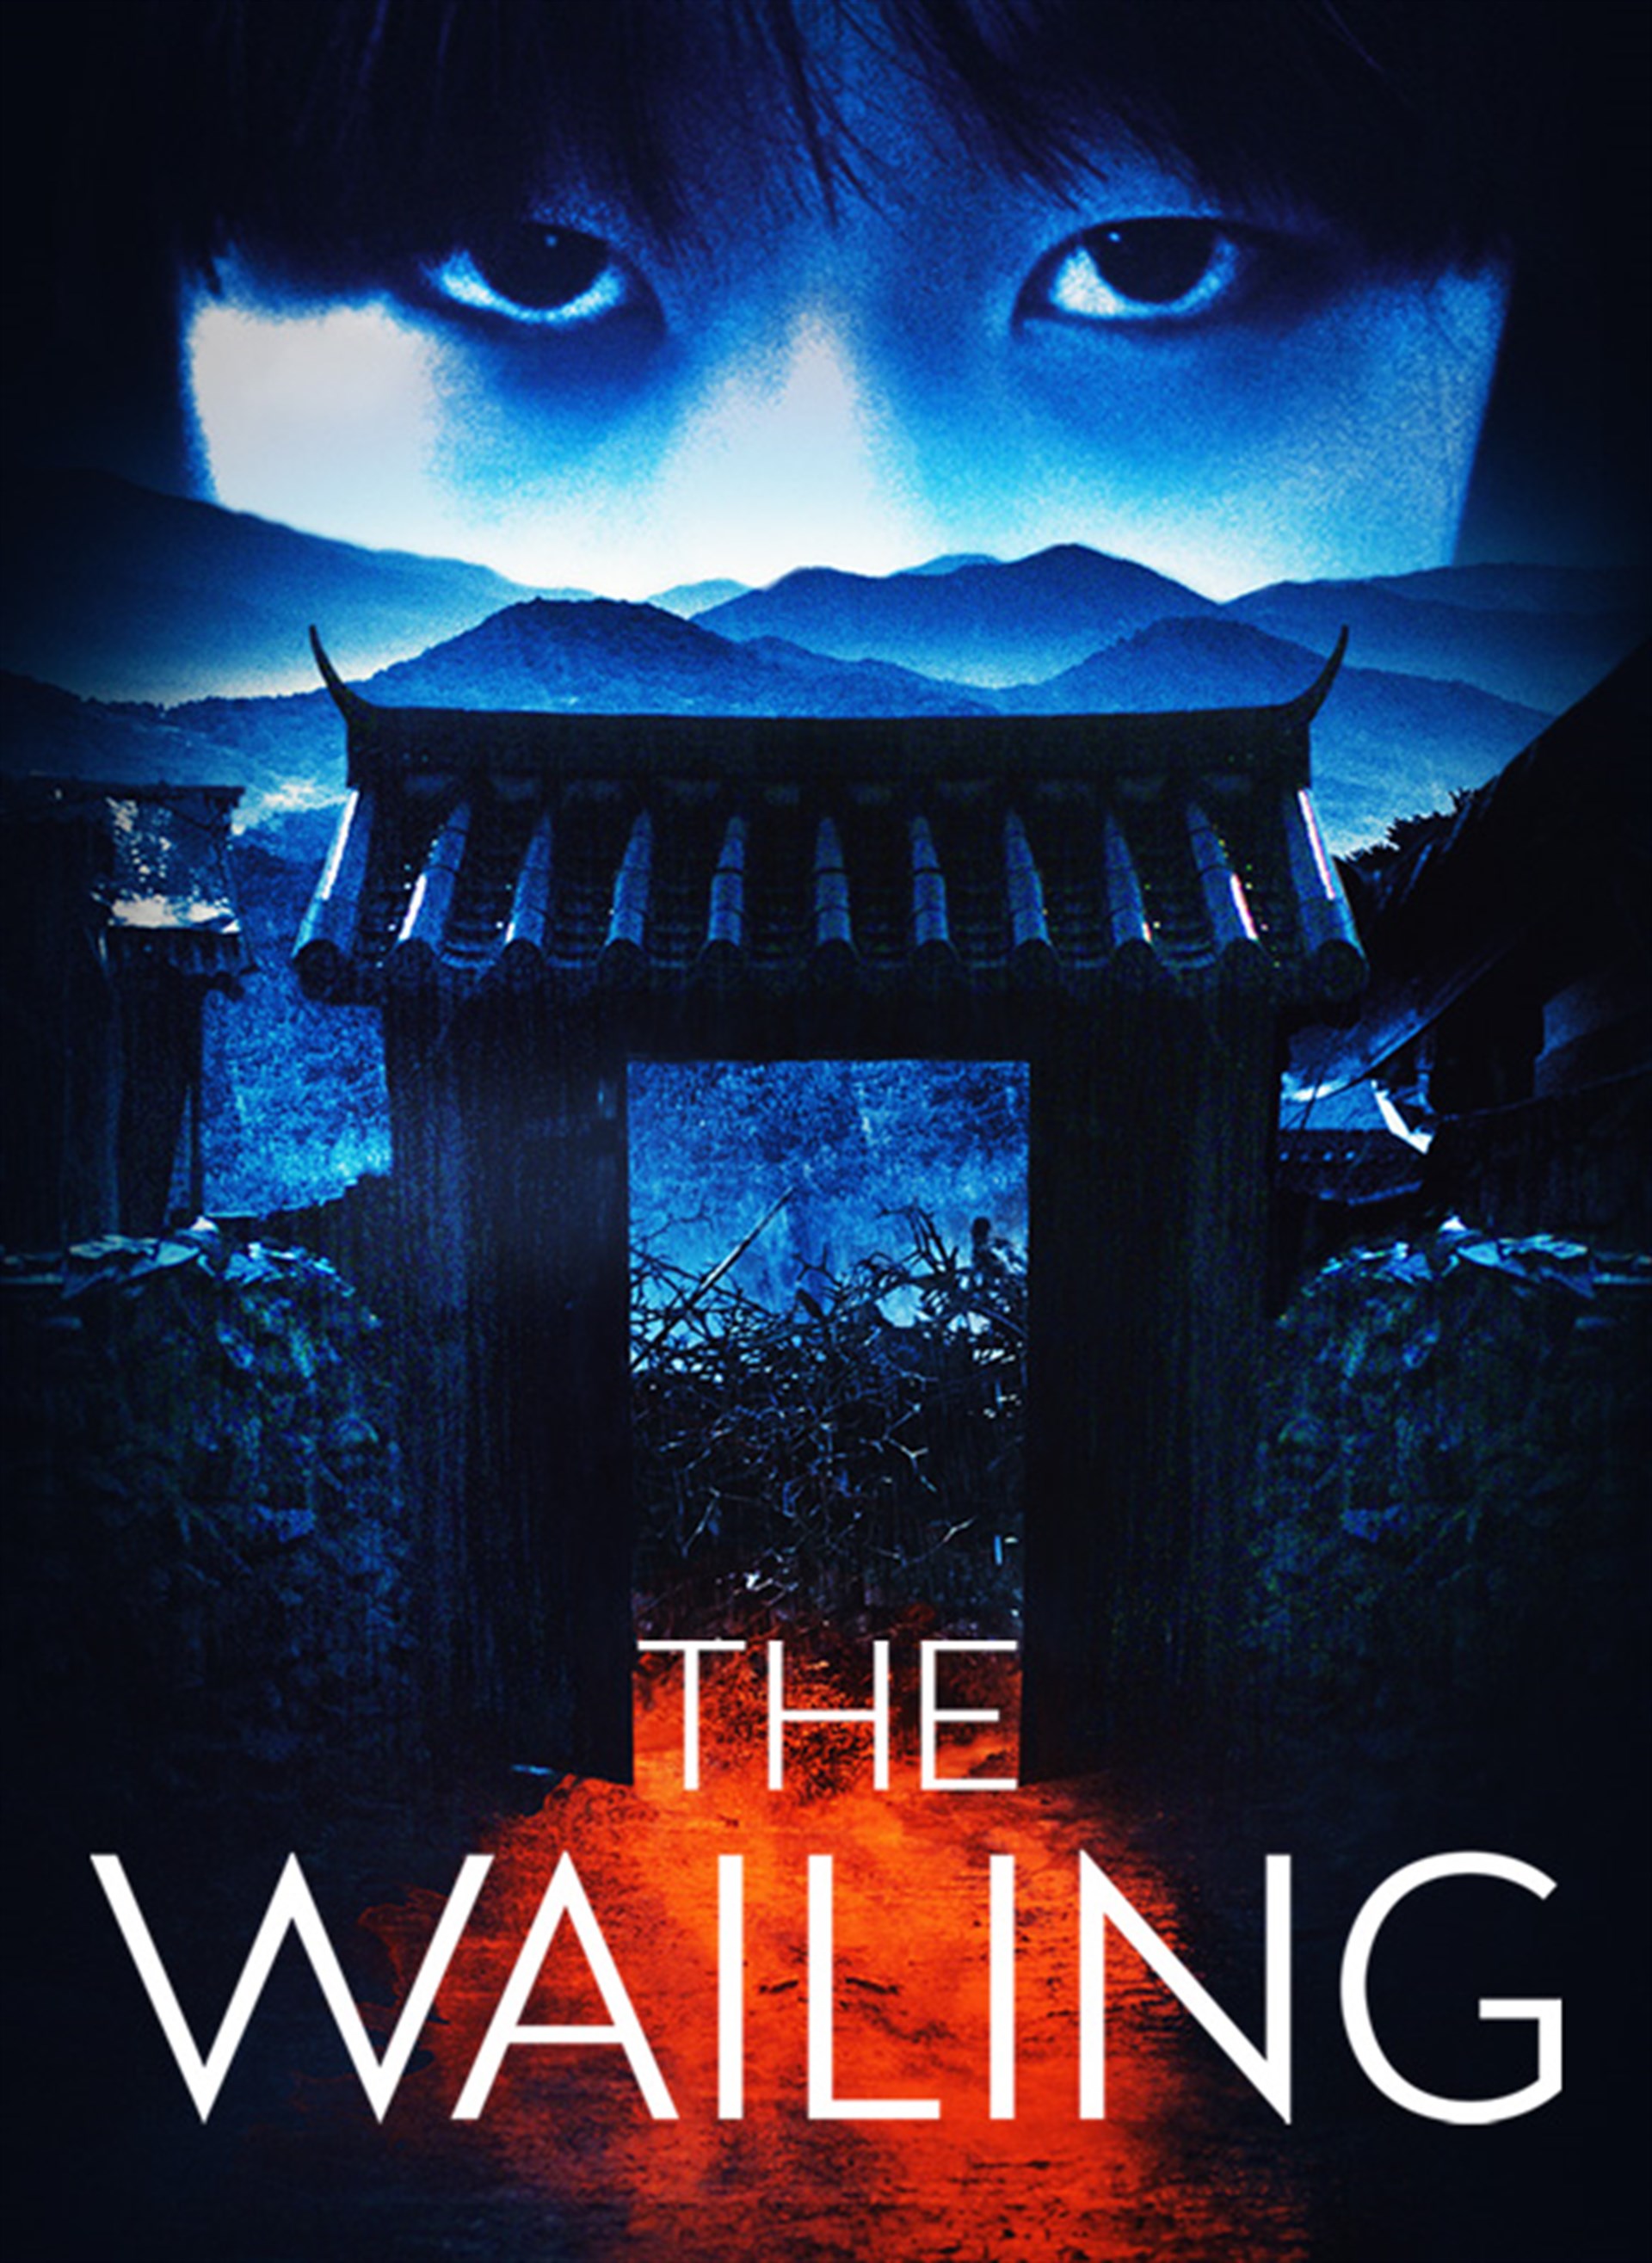 The Wailing (4K Dolby Vision)  - $6.99